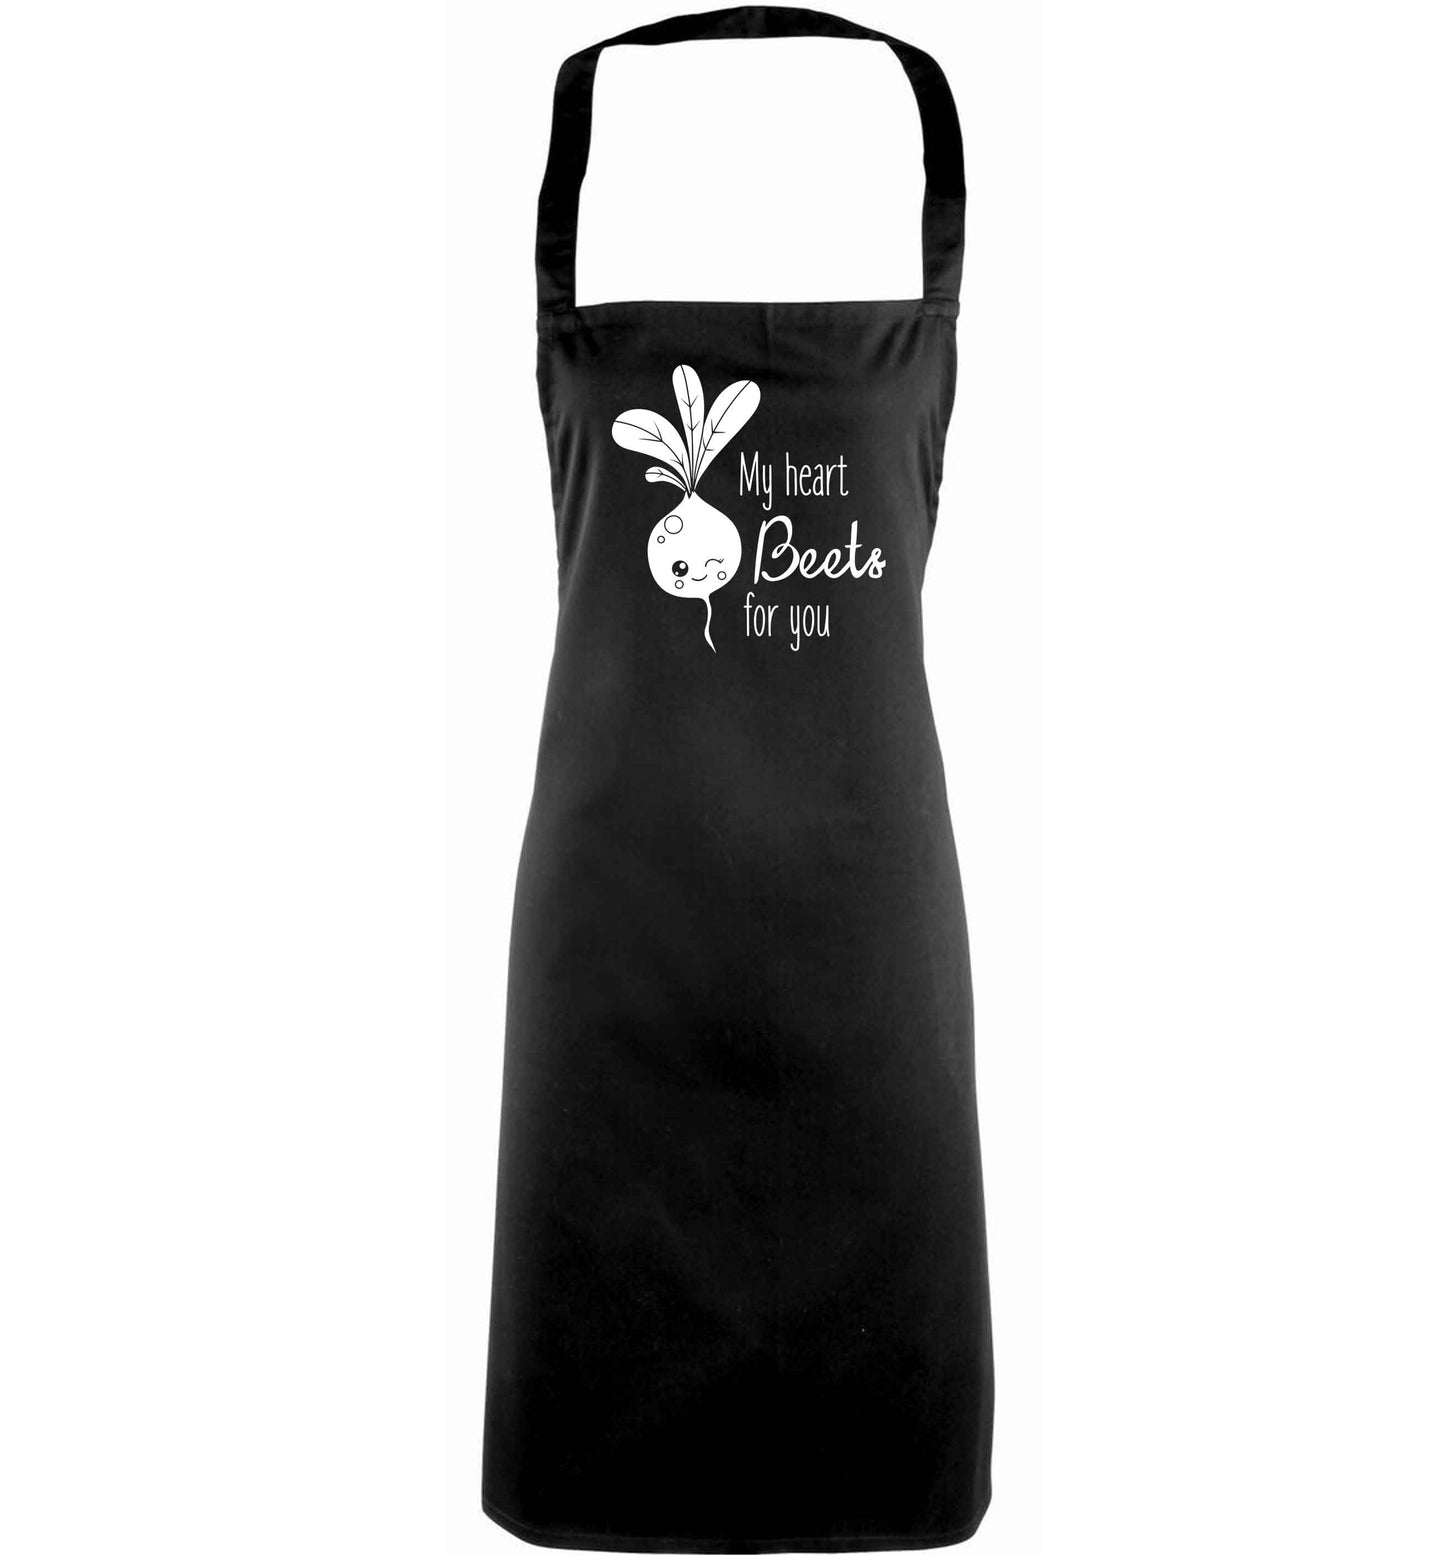 My heart beets for you adults black apron